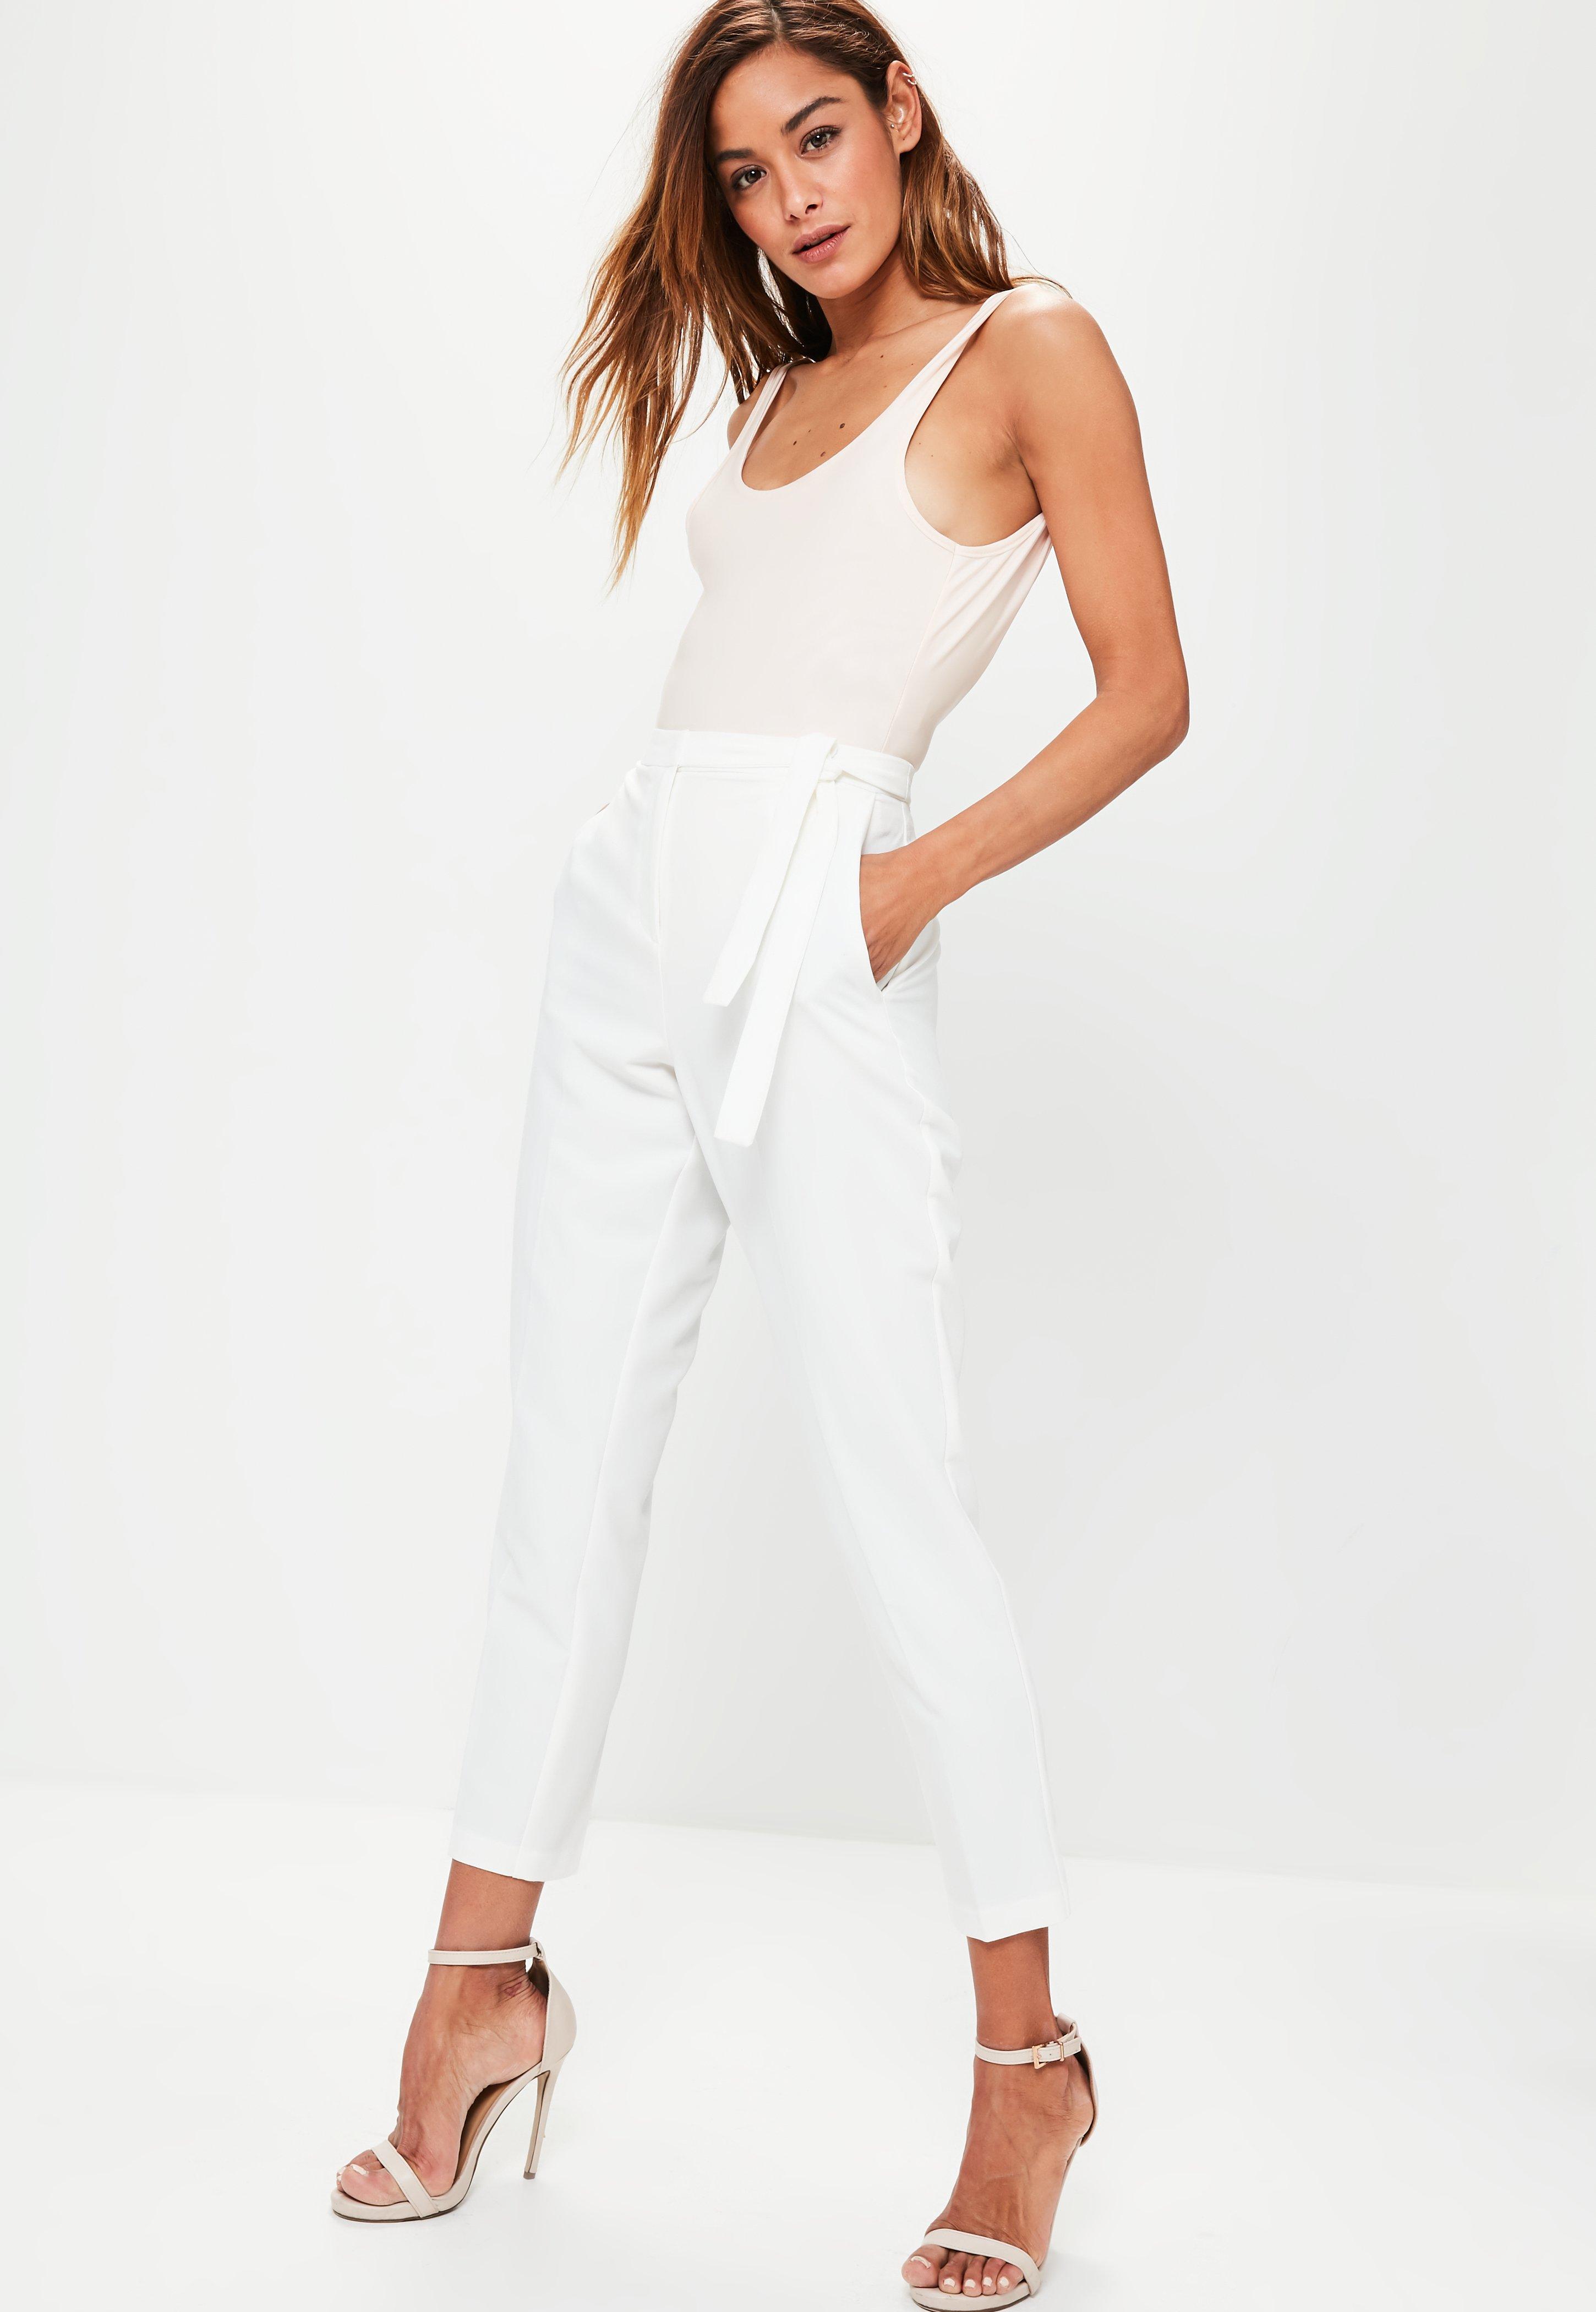 Blue Trousers | Navy & Light Blue Trousers - Missguided